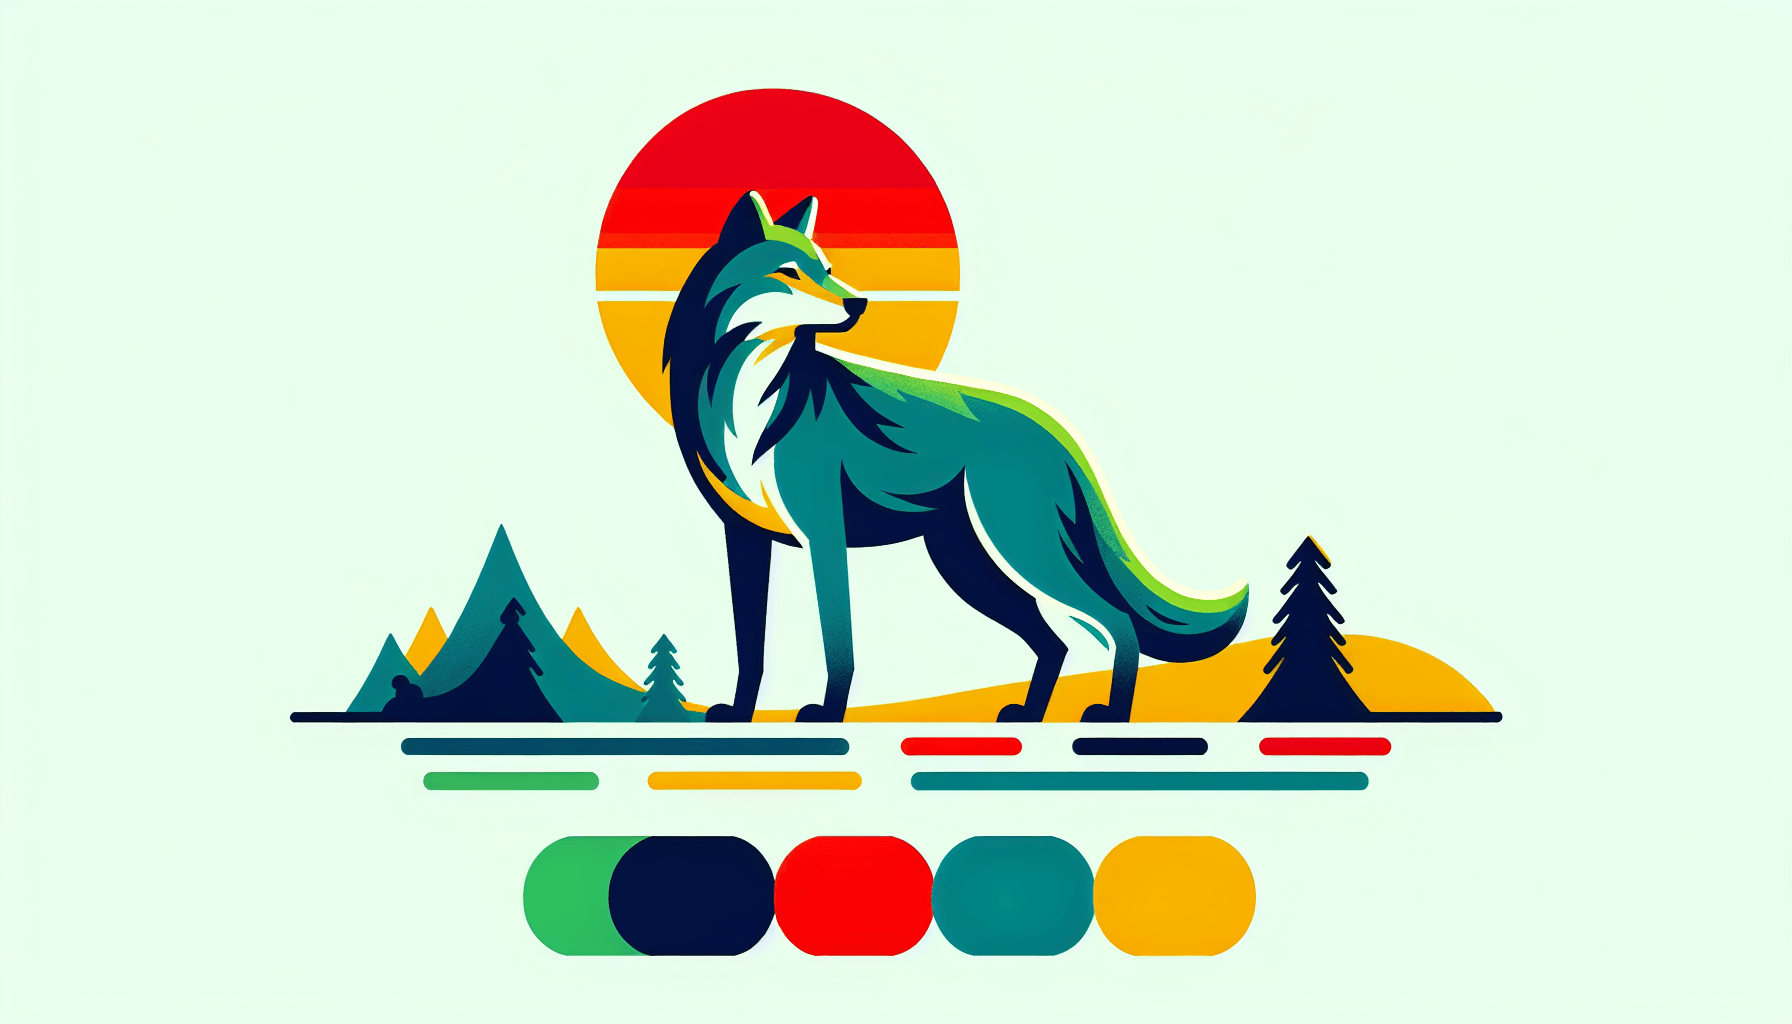 Lone wolf in flat illustration style and white background, red #f47574, green #88c7a8, yellow #fcc44b, and blue #645bc8 colors.